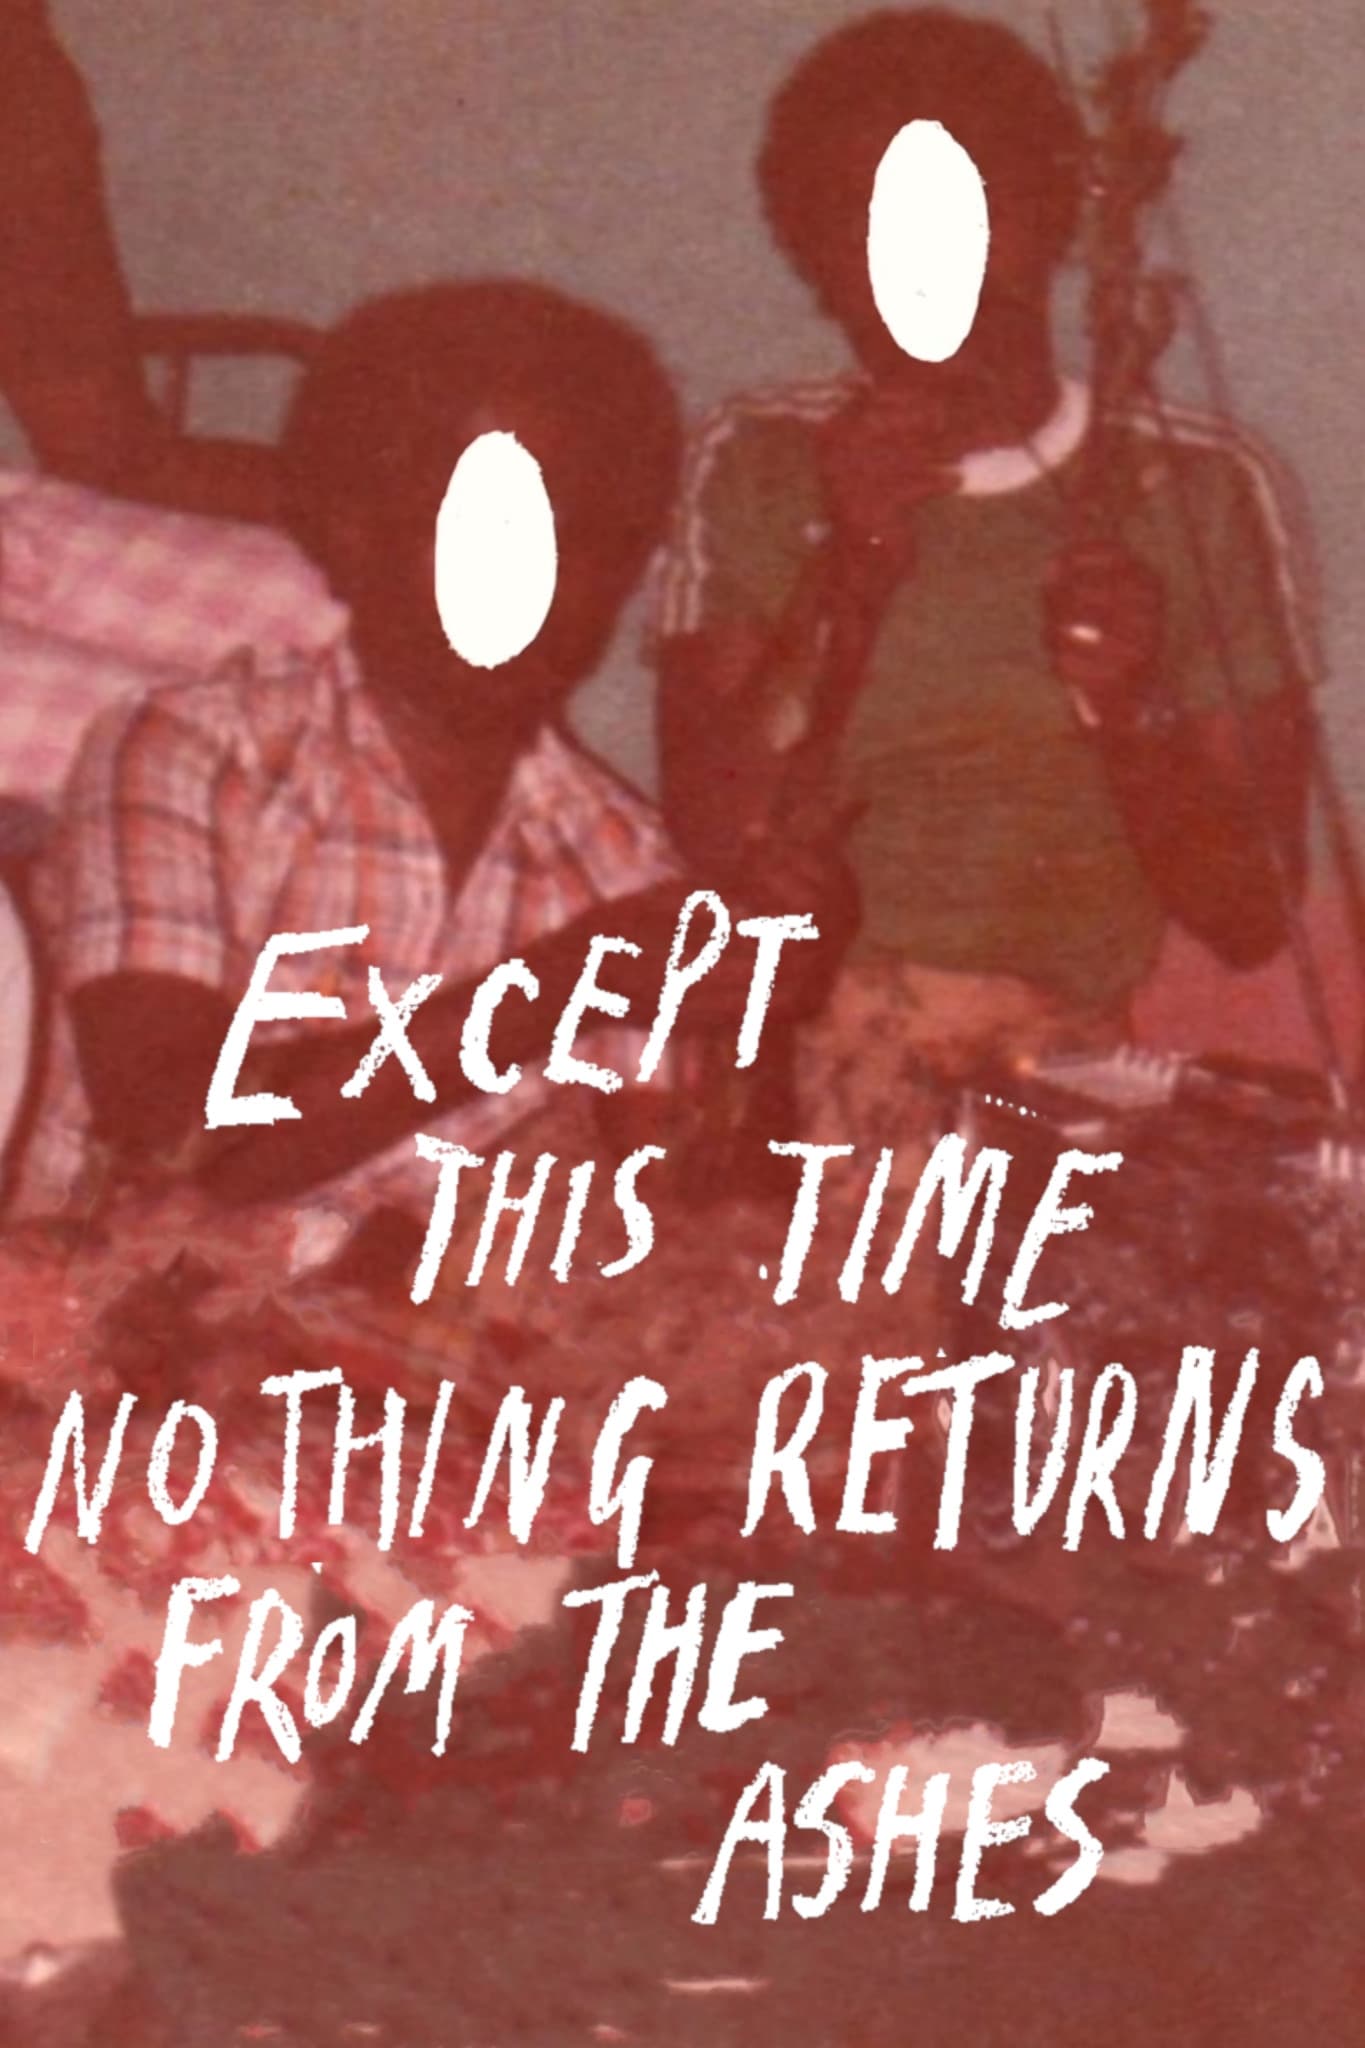 Except this time nothing returns from the ashes